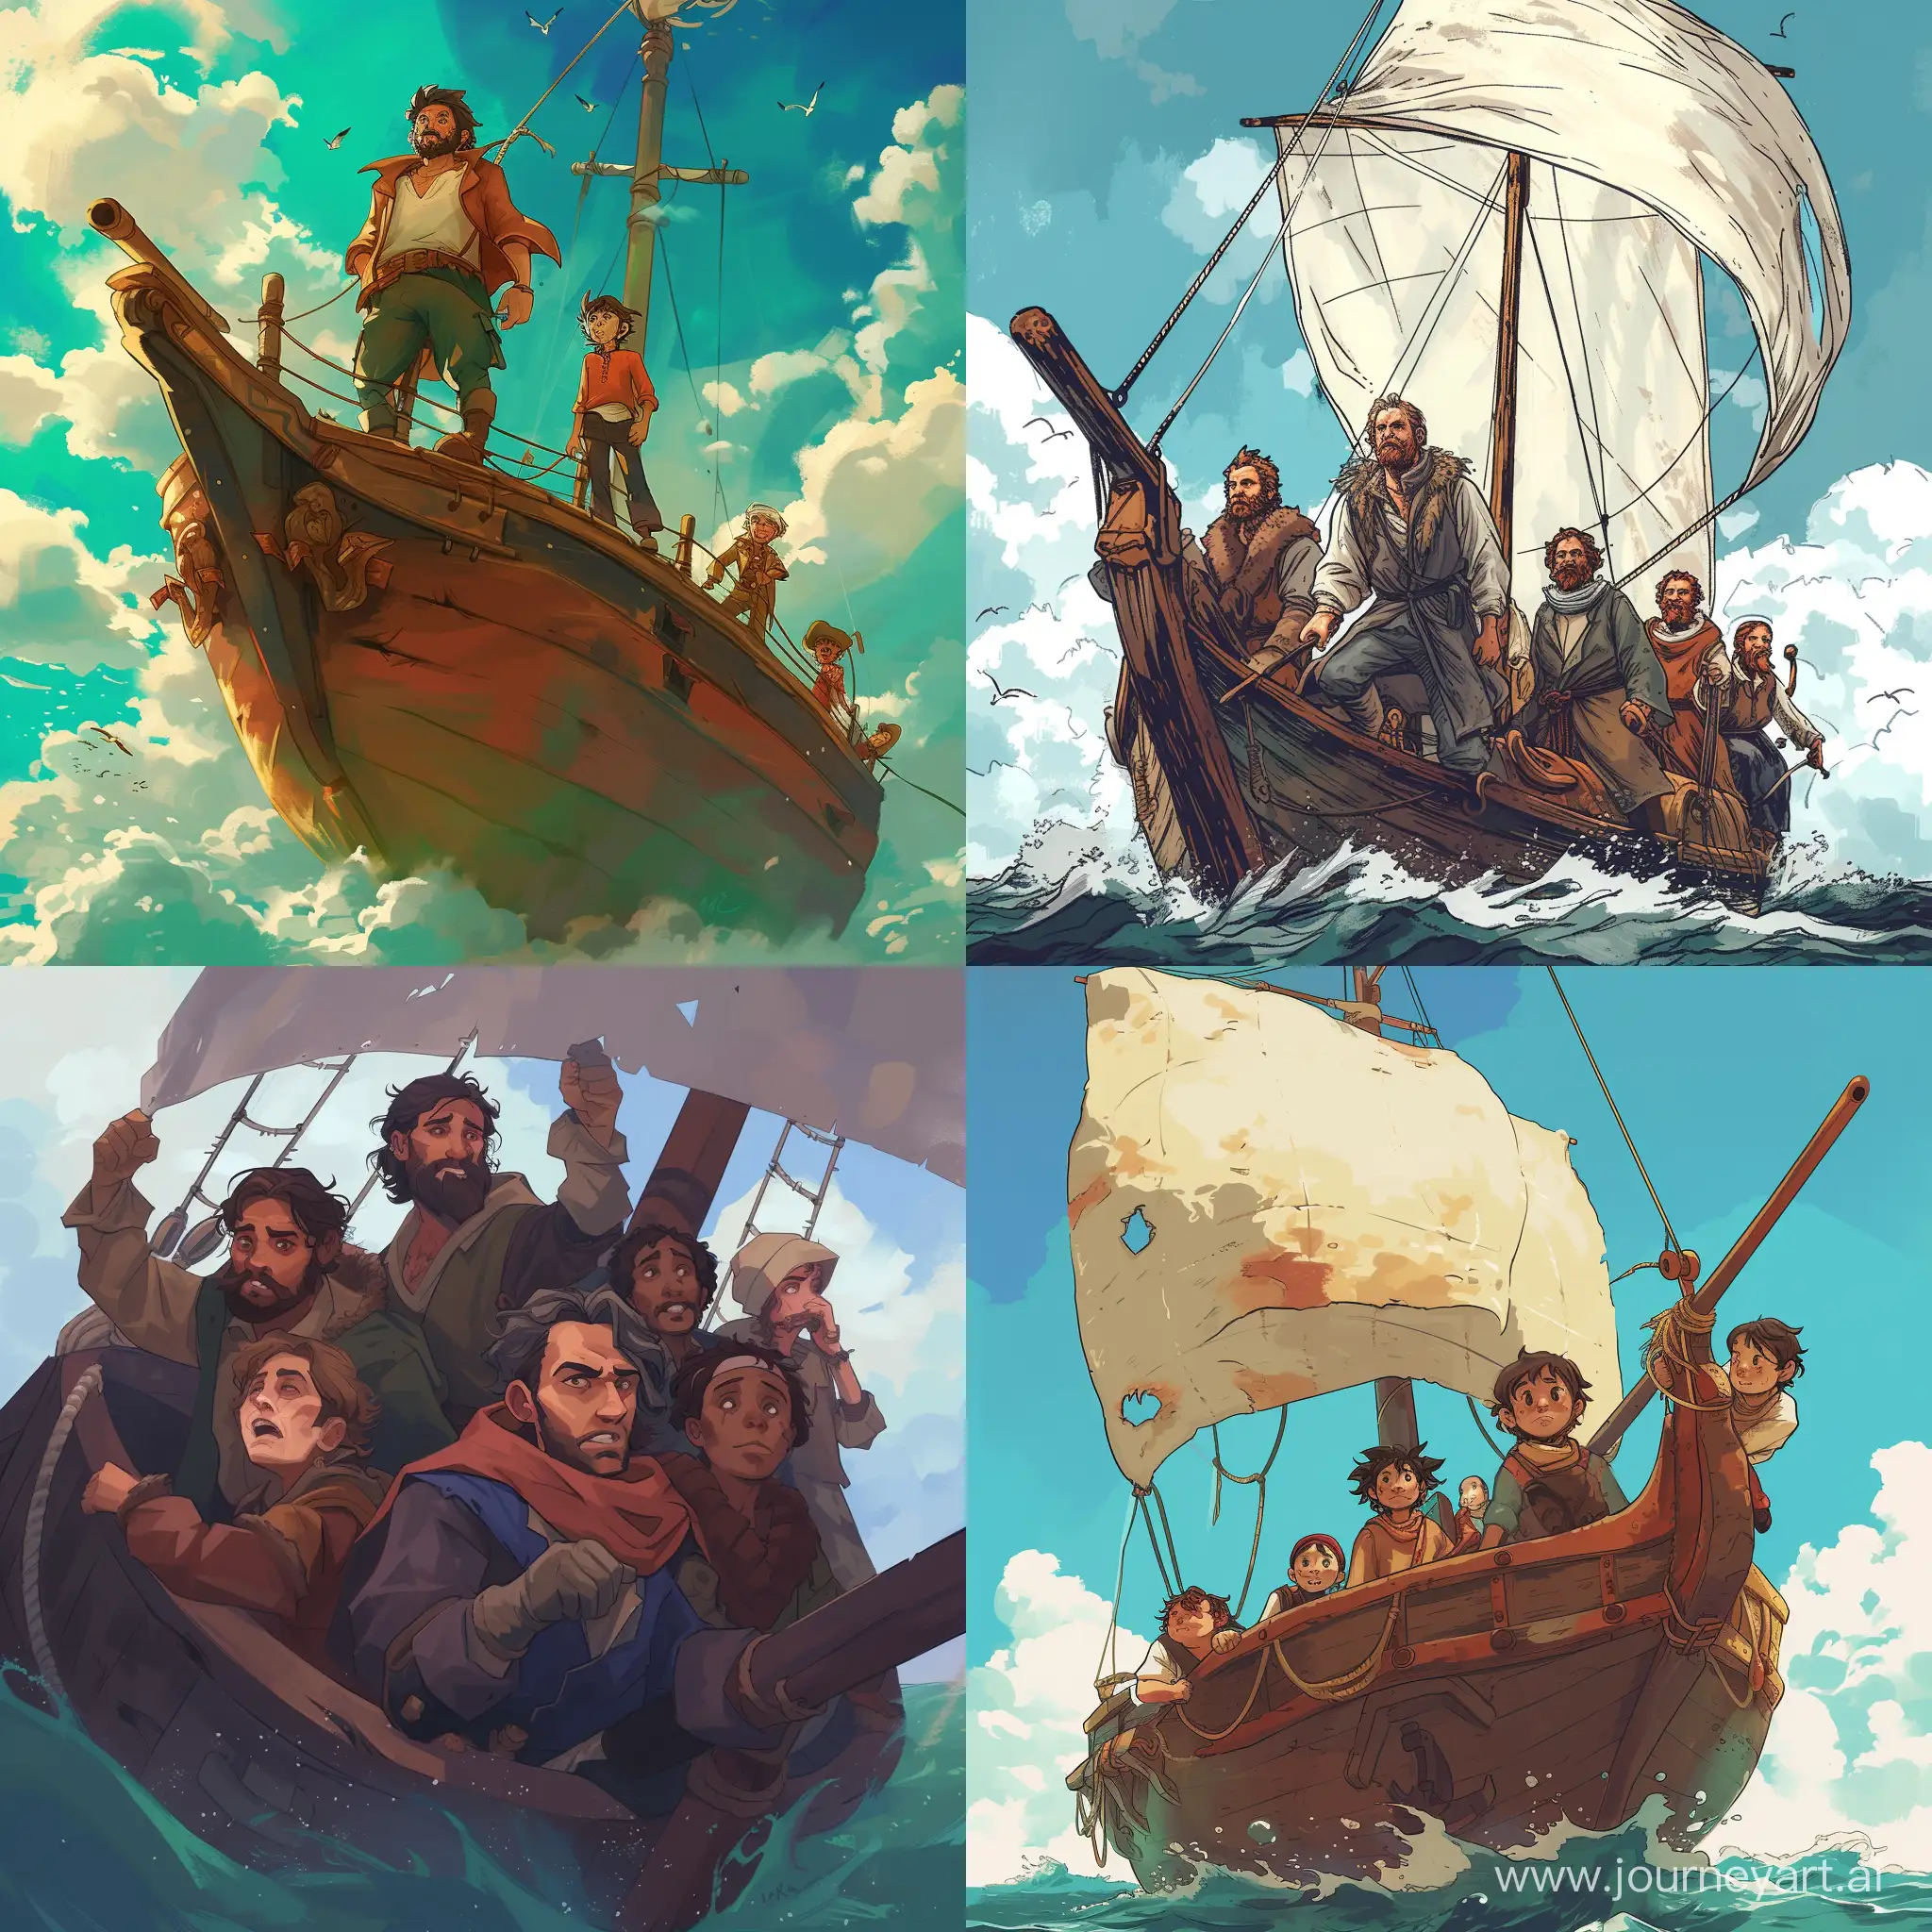 Adventure-Continues-The-Ship-and-Friends-on-a-Determined-Journey